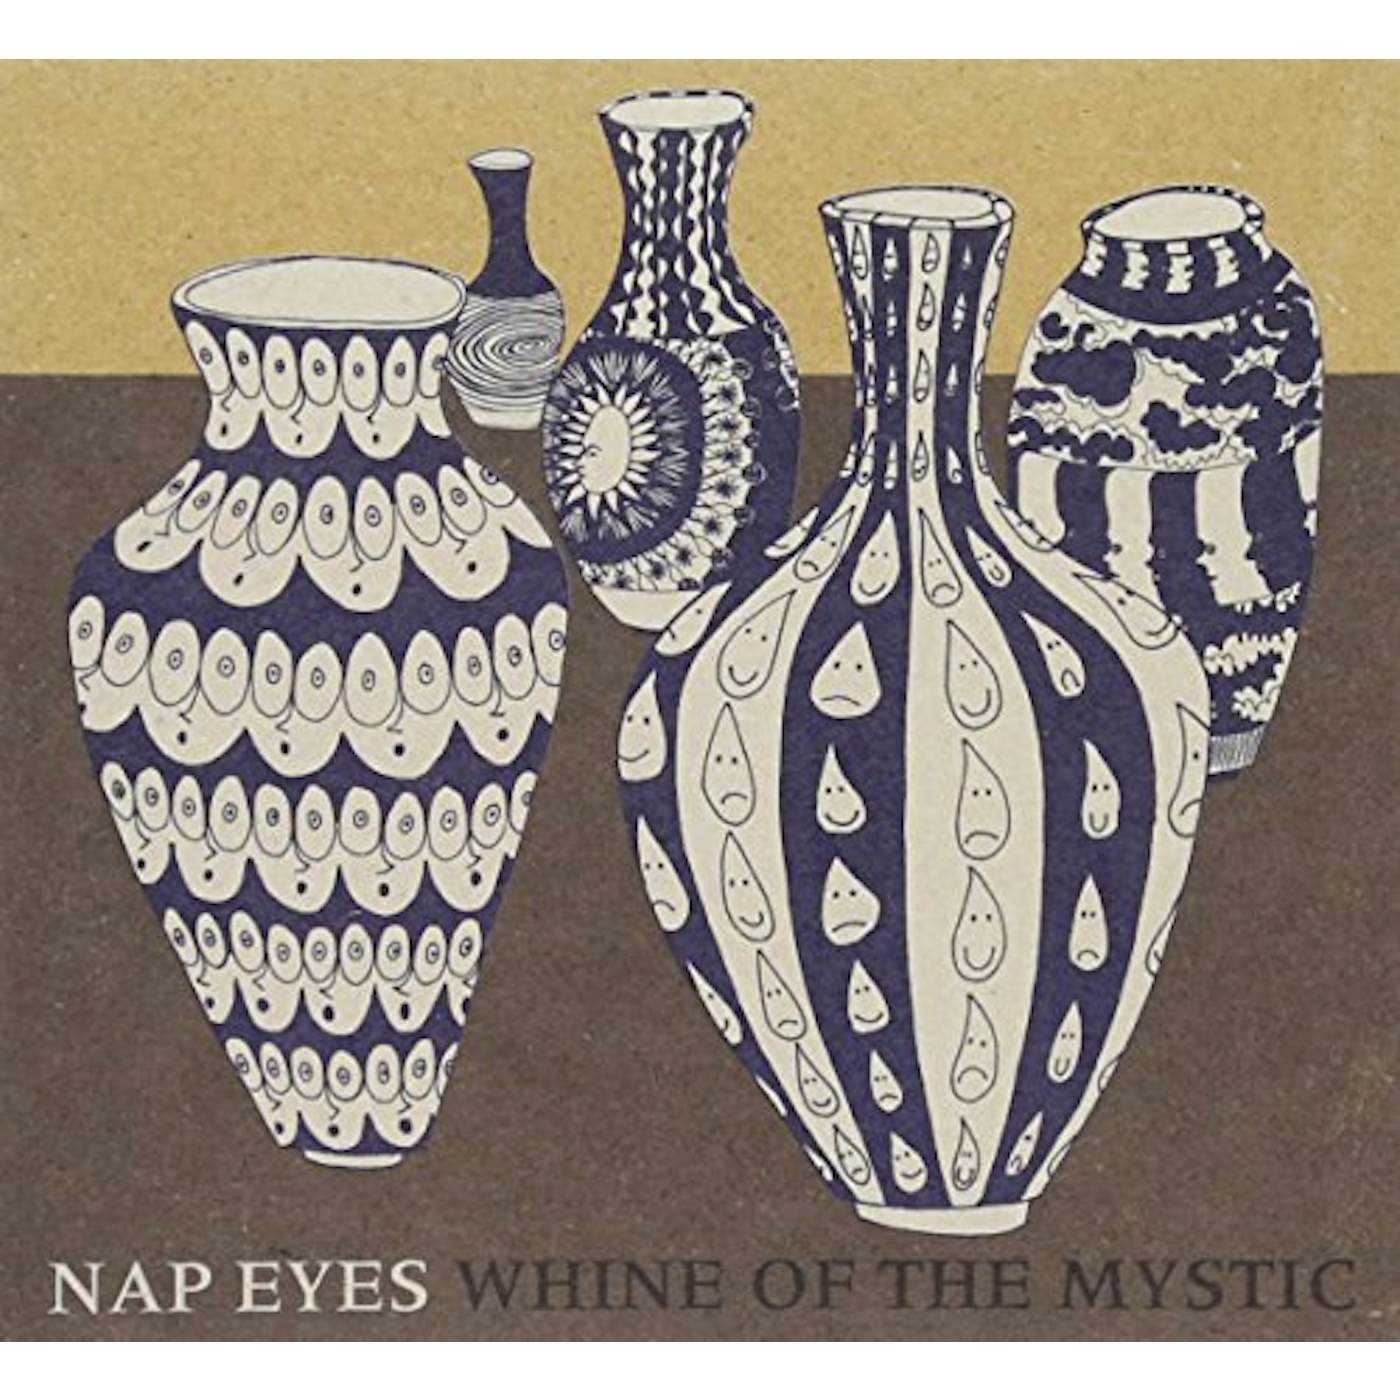 Nap Eyes WHINE OF THE MYSTIC CD